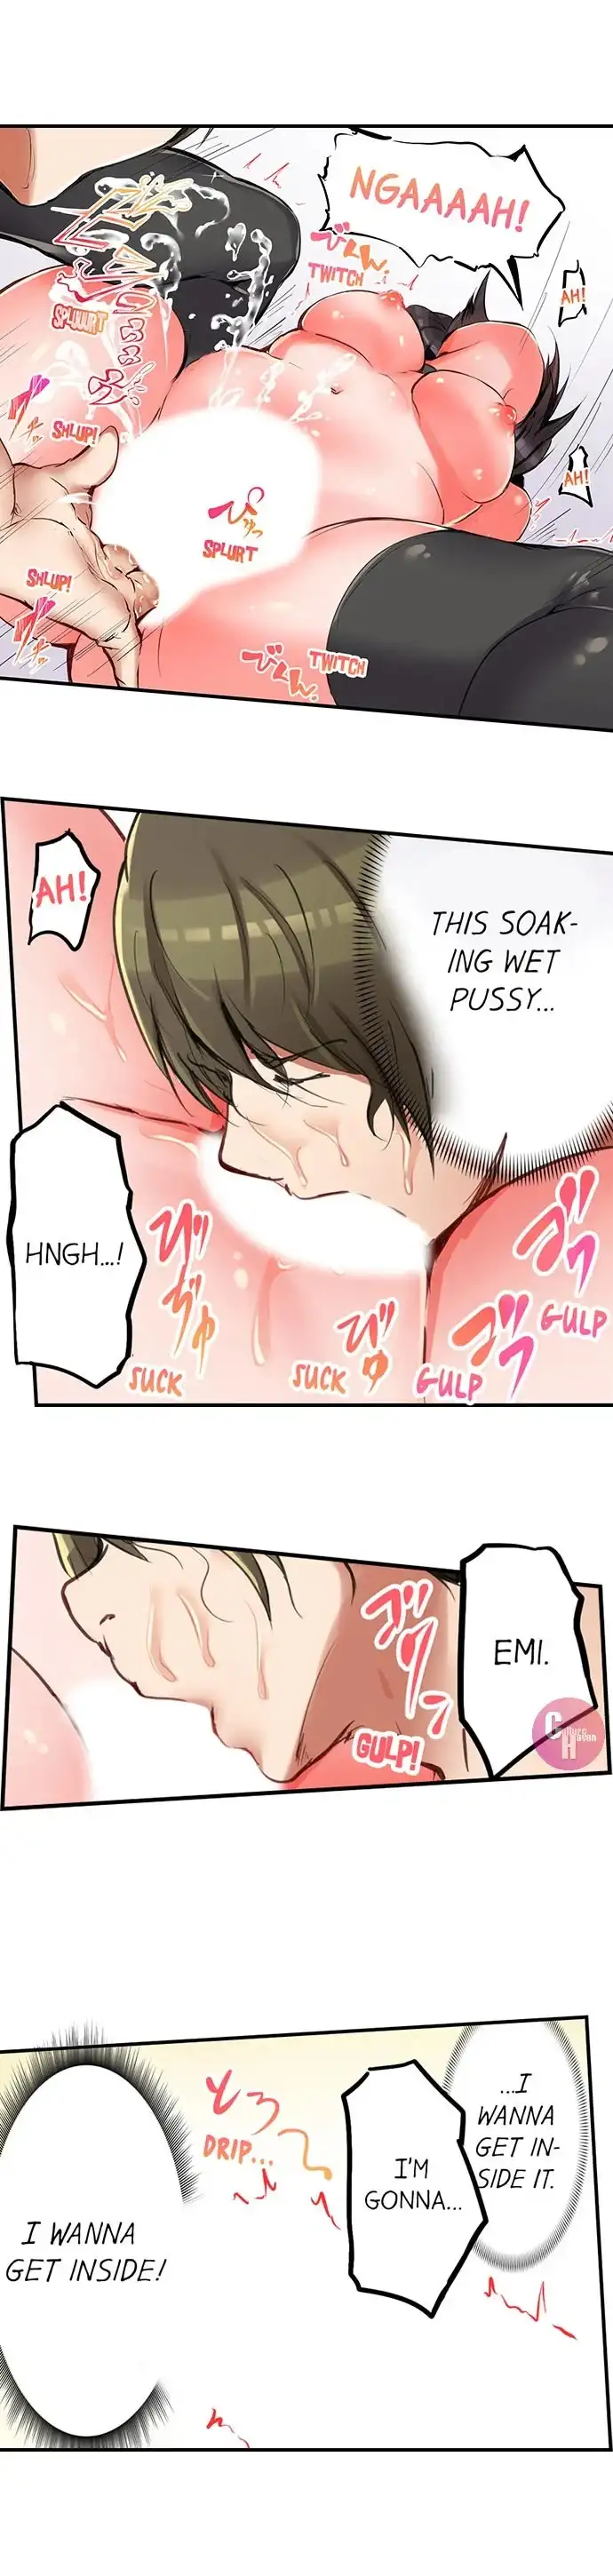 All Night Sex with Biggest Cock - Chapter 8 Page 6